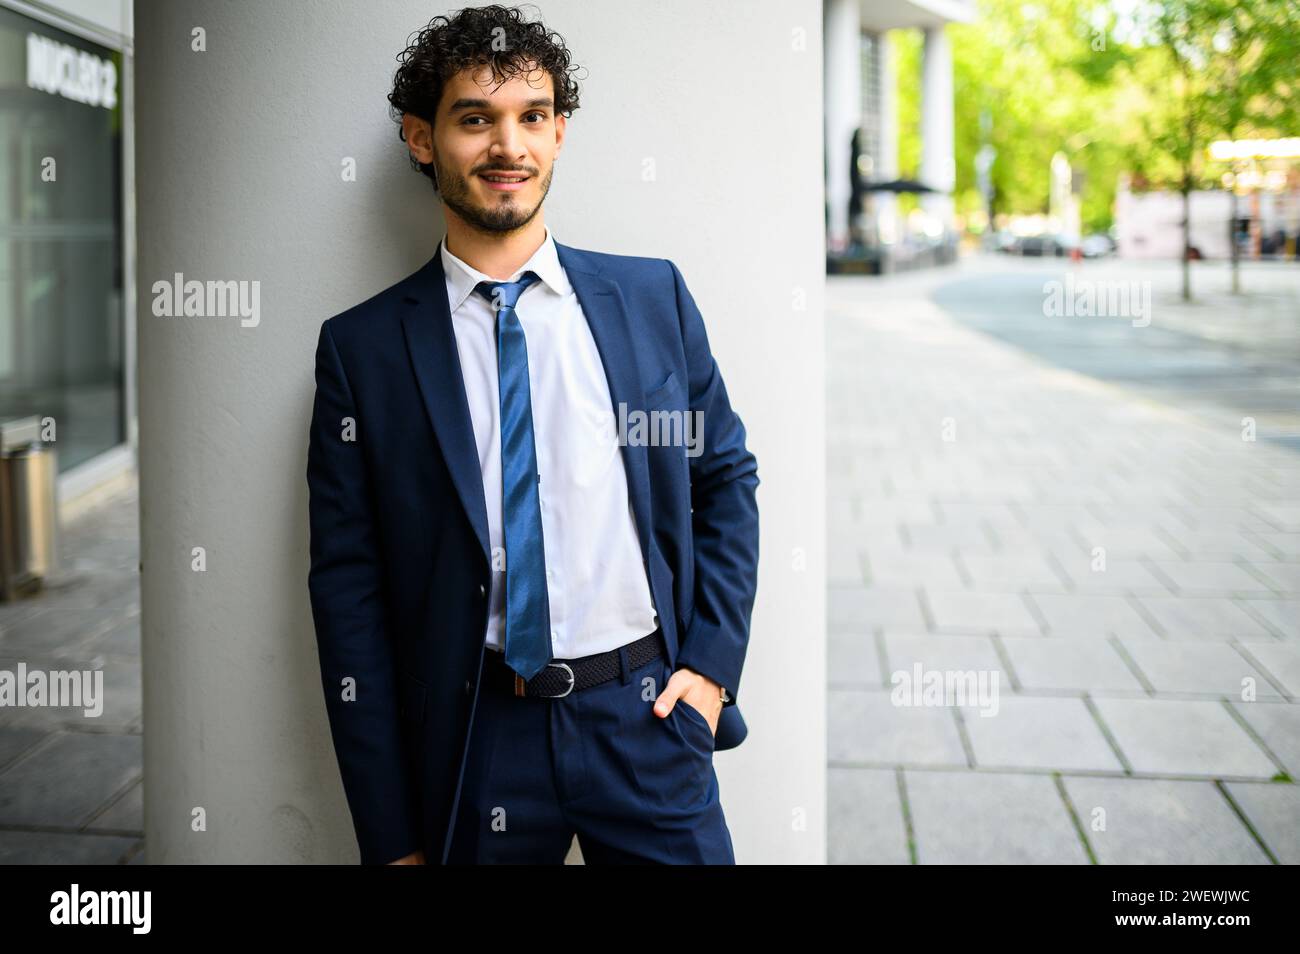 Young businessman outdoor in a modern setting Stock Photo